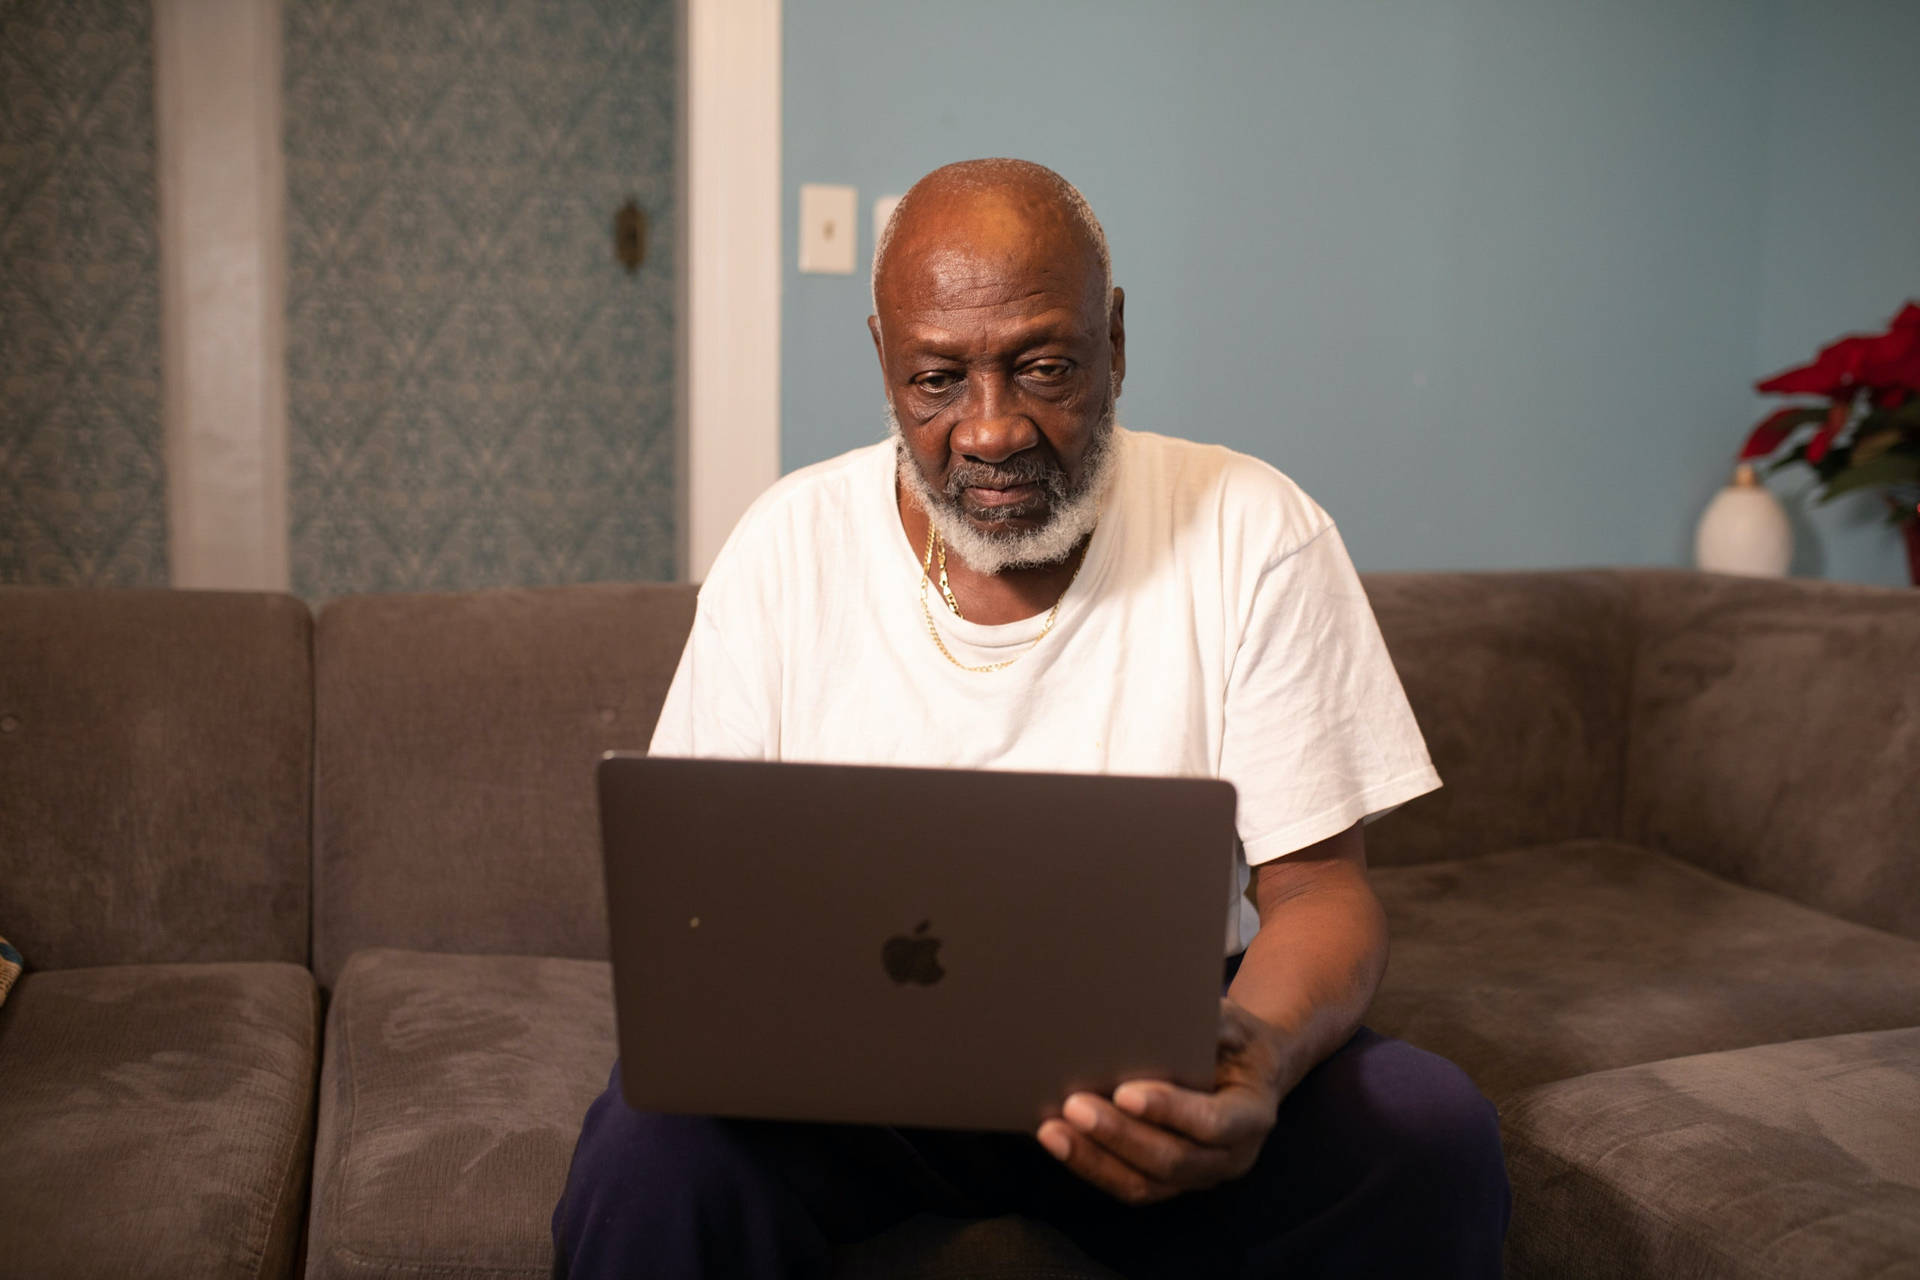 Old Black Man Using Laptop On Couch Background